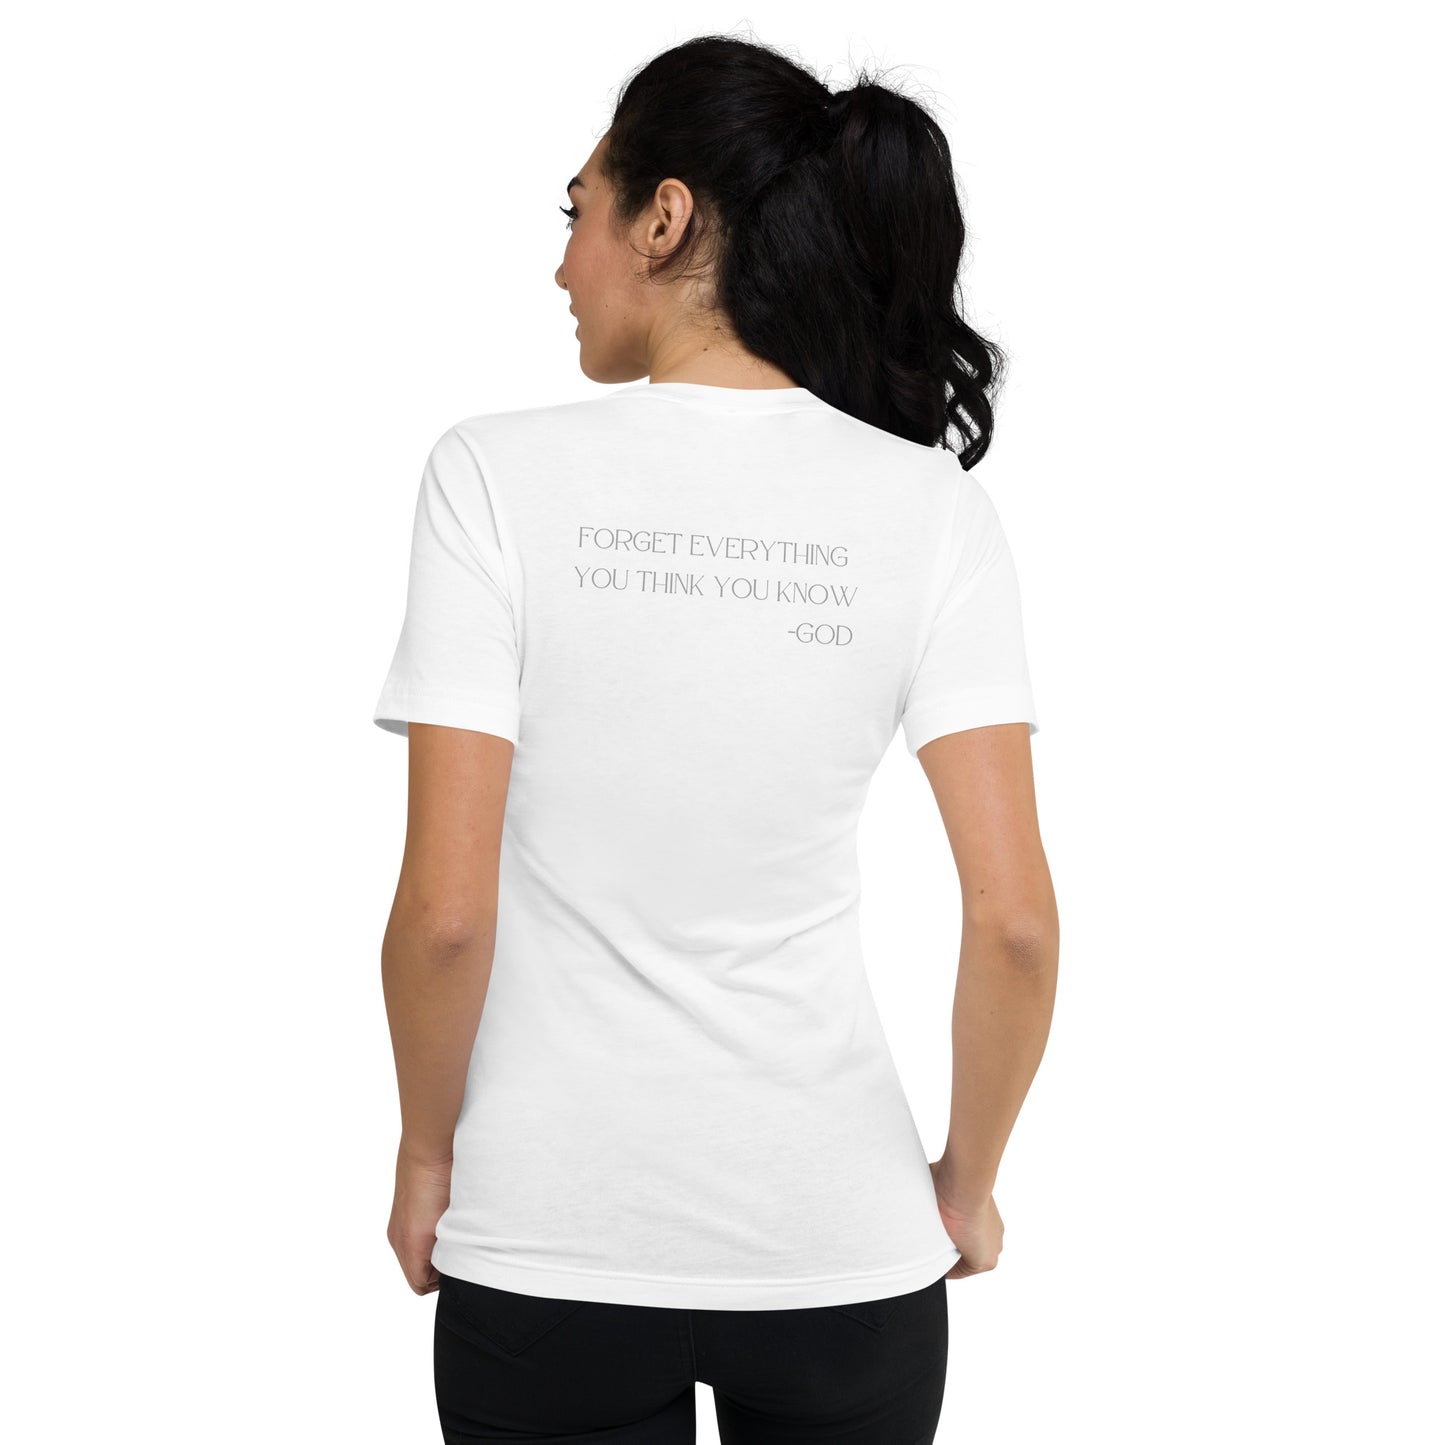 Forget Everything You Think You Know -GOD Women's Short Sleeve V-Neck T-Shirt